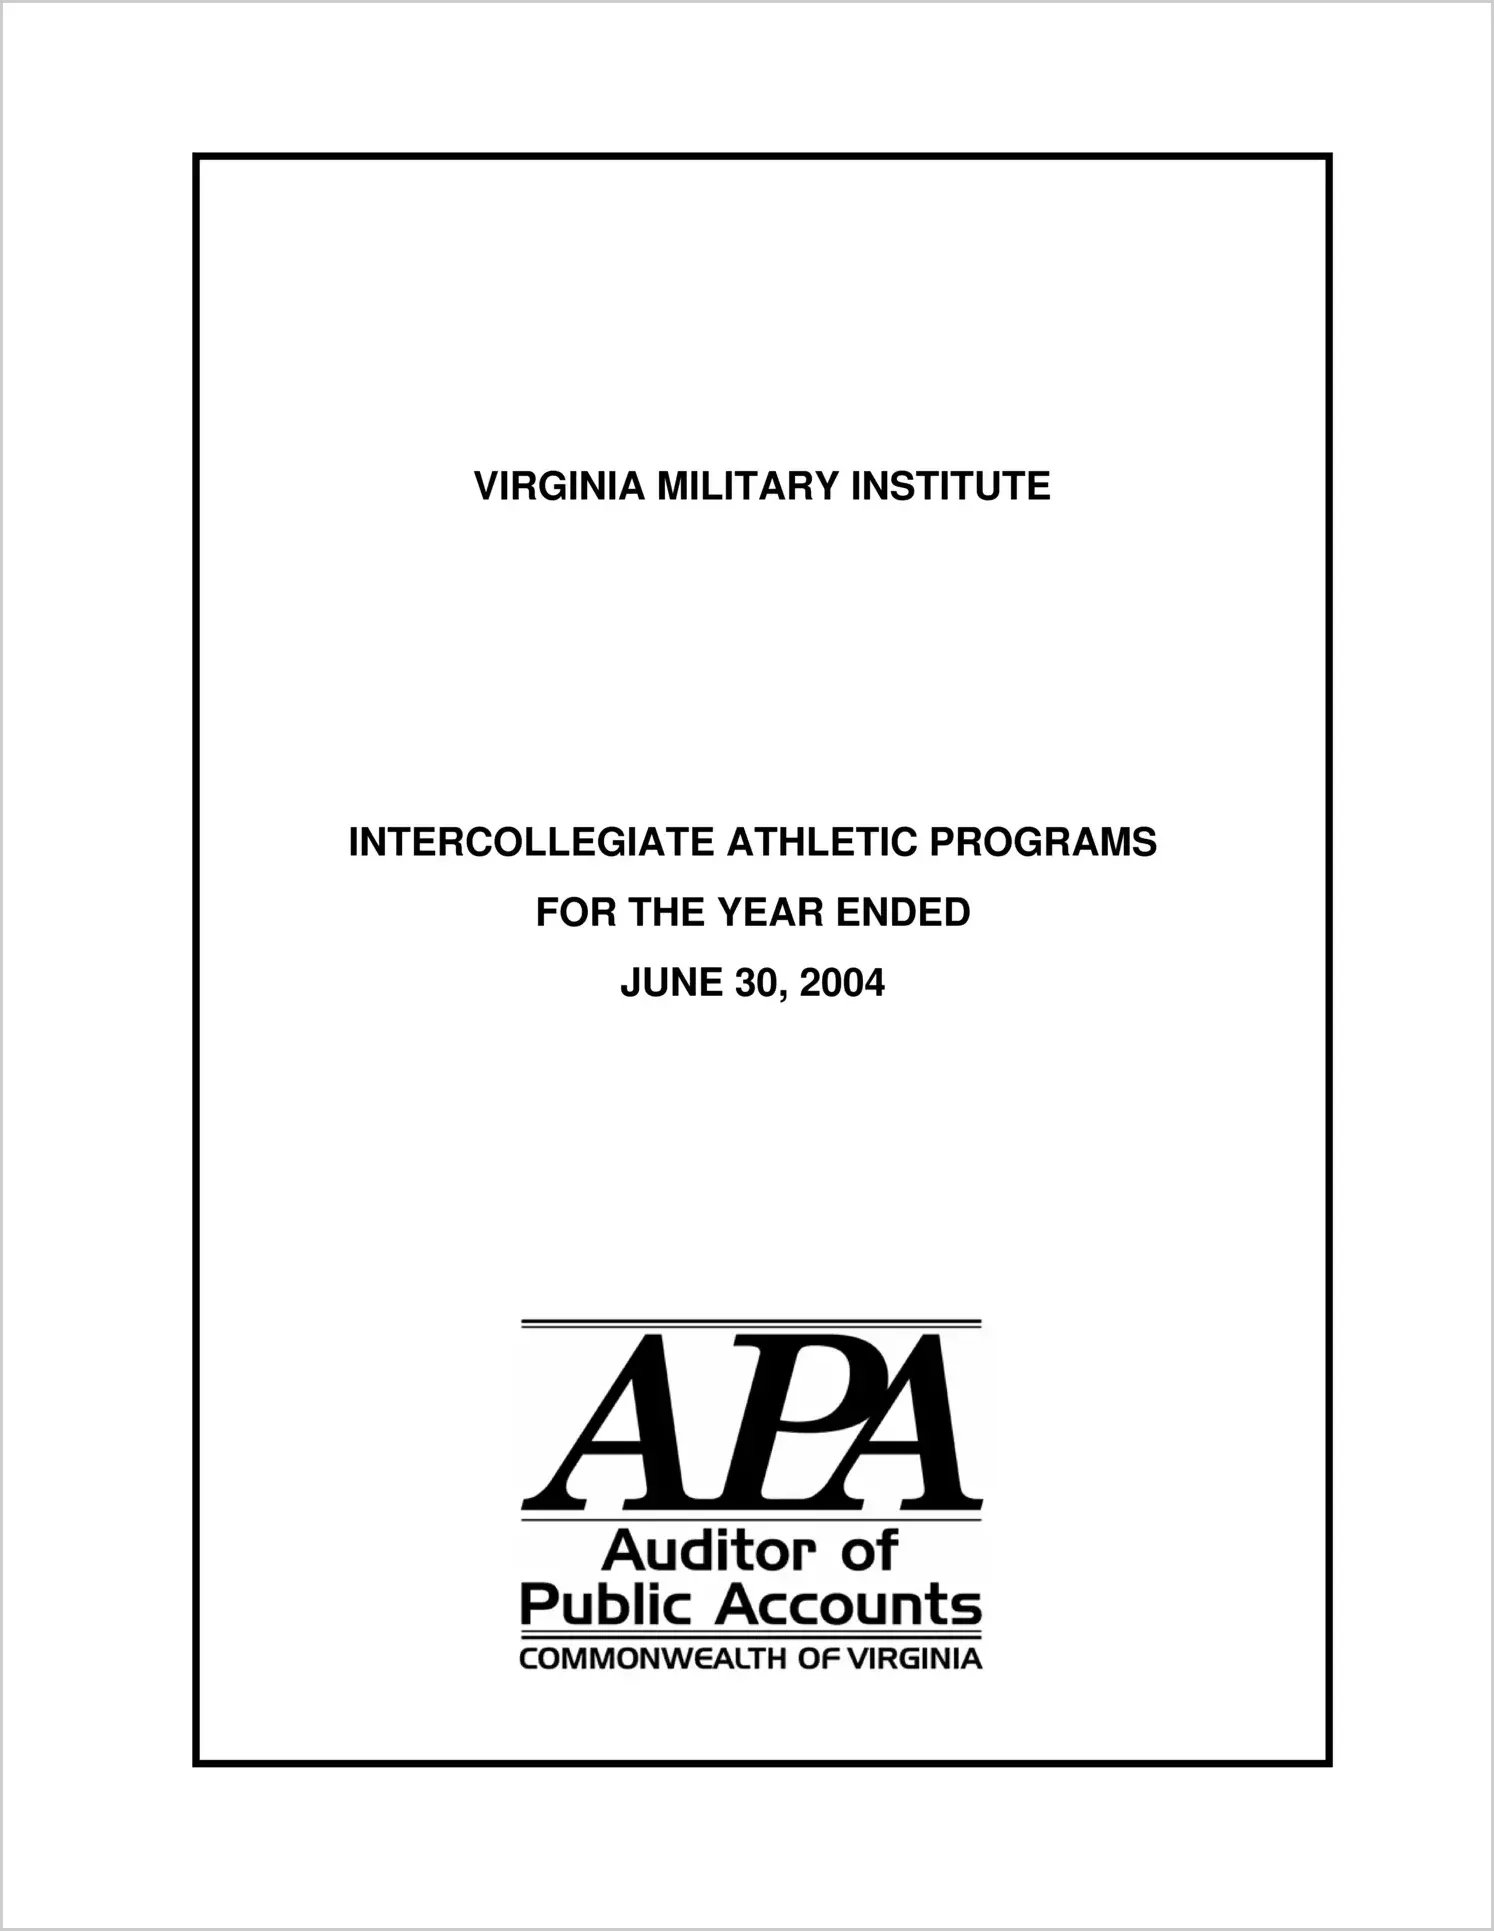 Virginia Military Institute Intercollegiate Athletic Programs for the year ended June 30, 2004